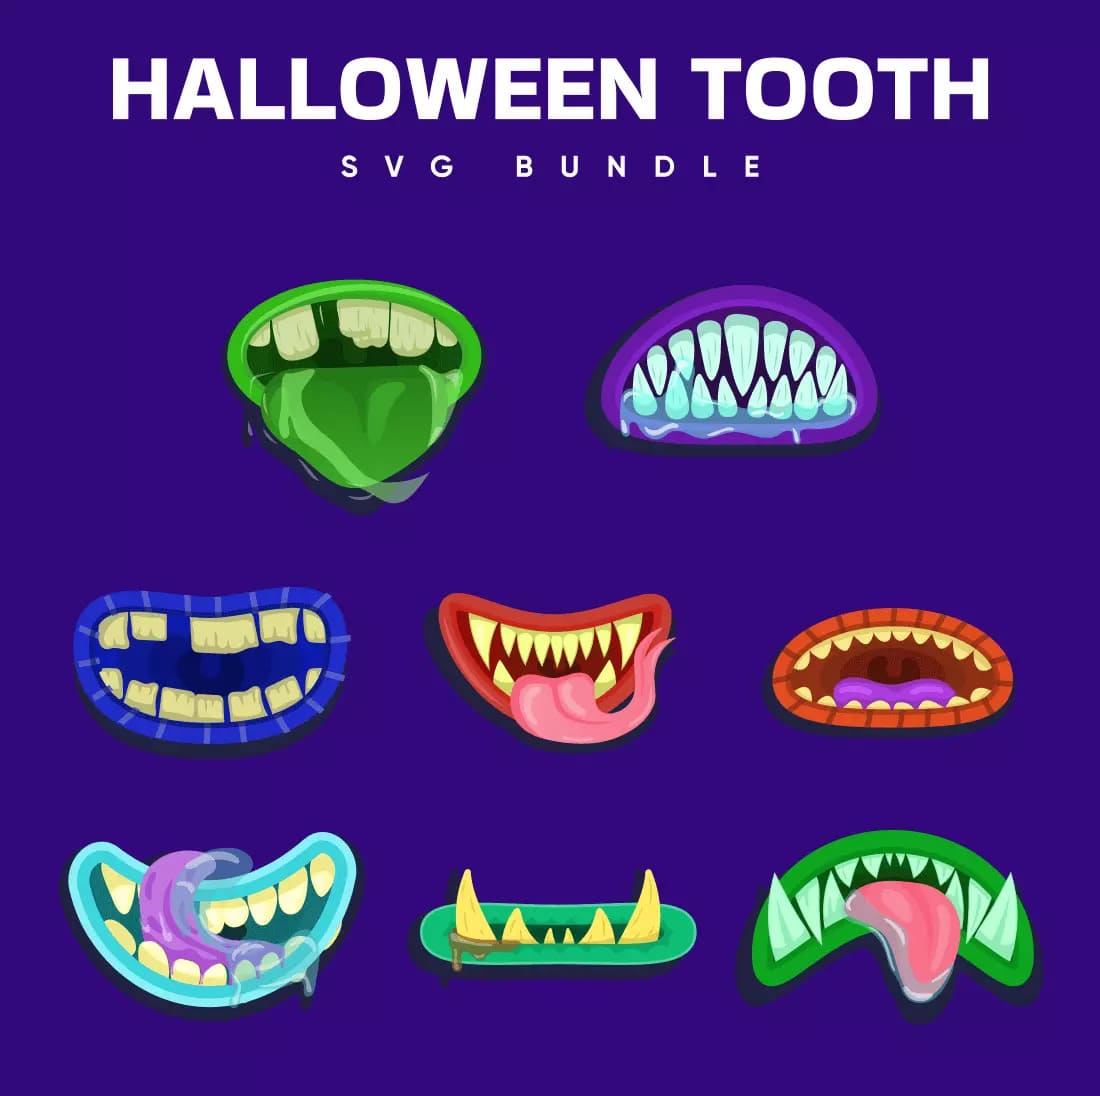 Halloween Tooth SVG Bundle Preview.